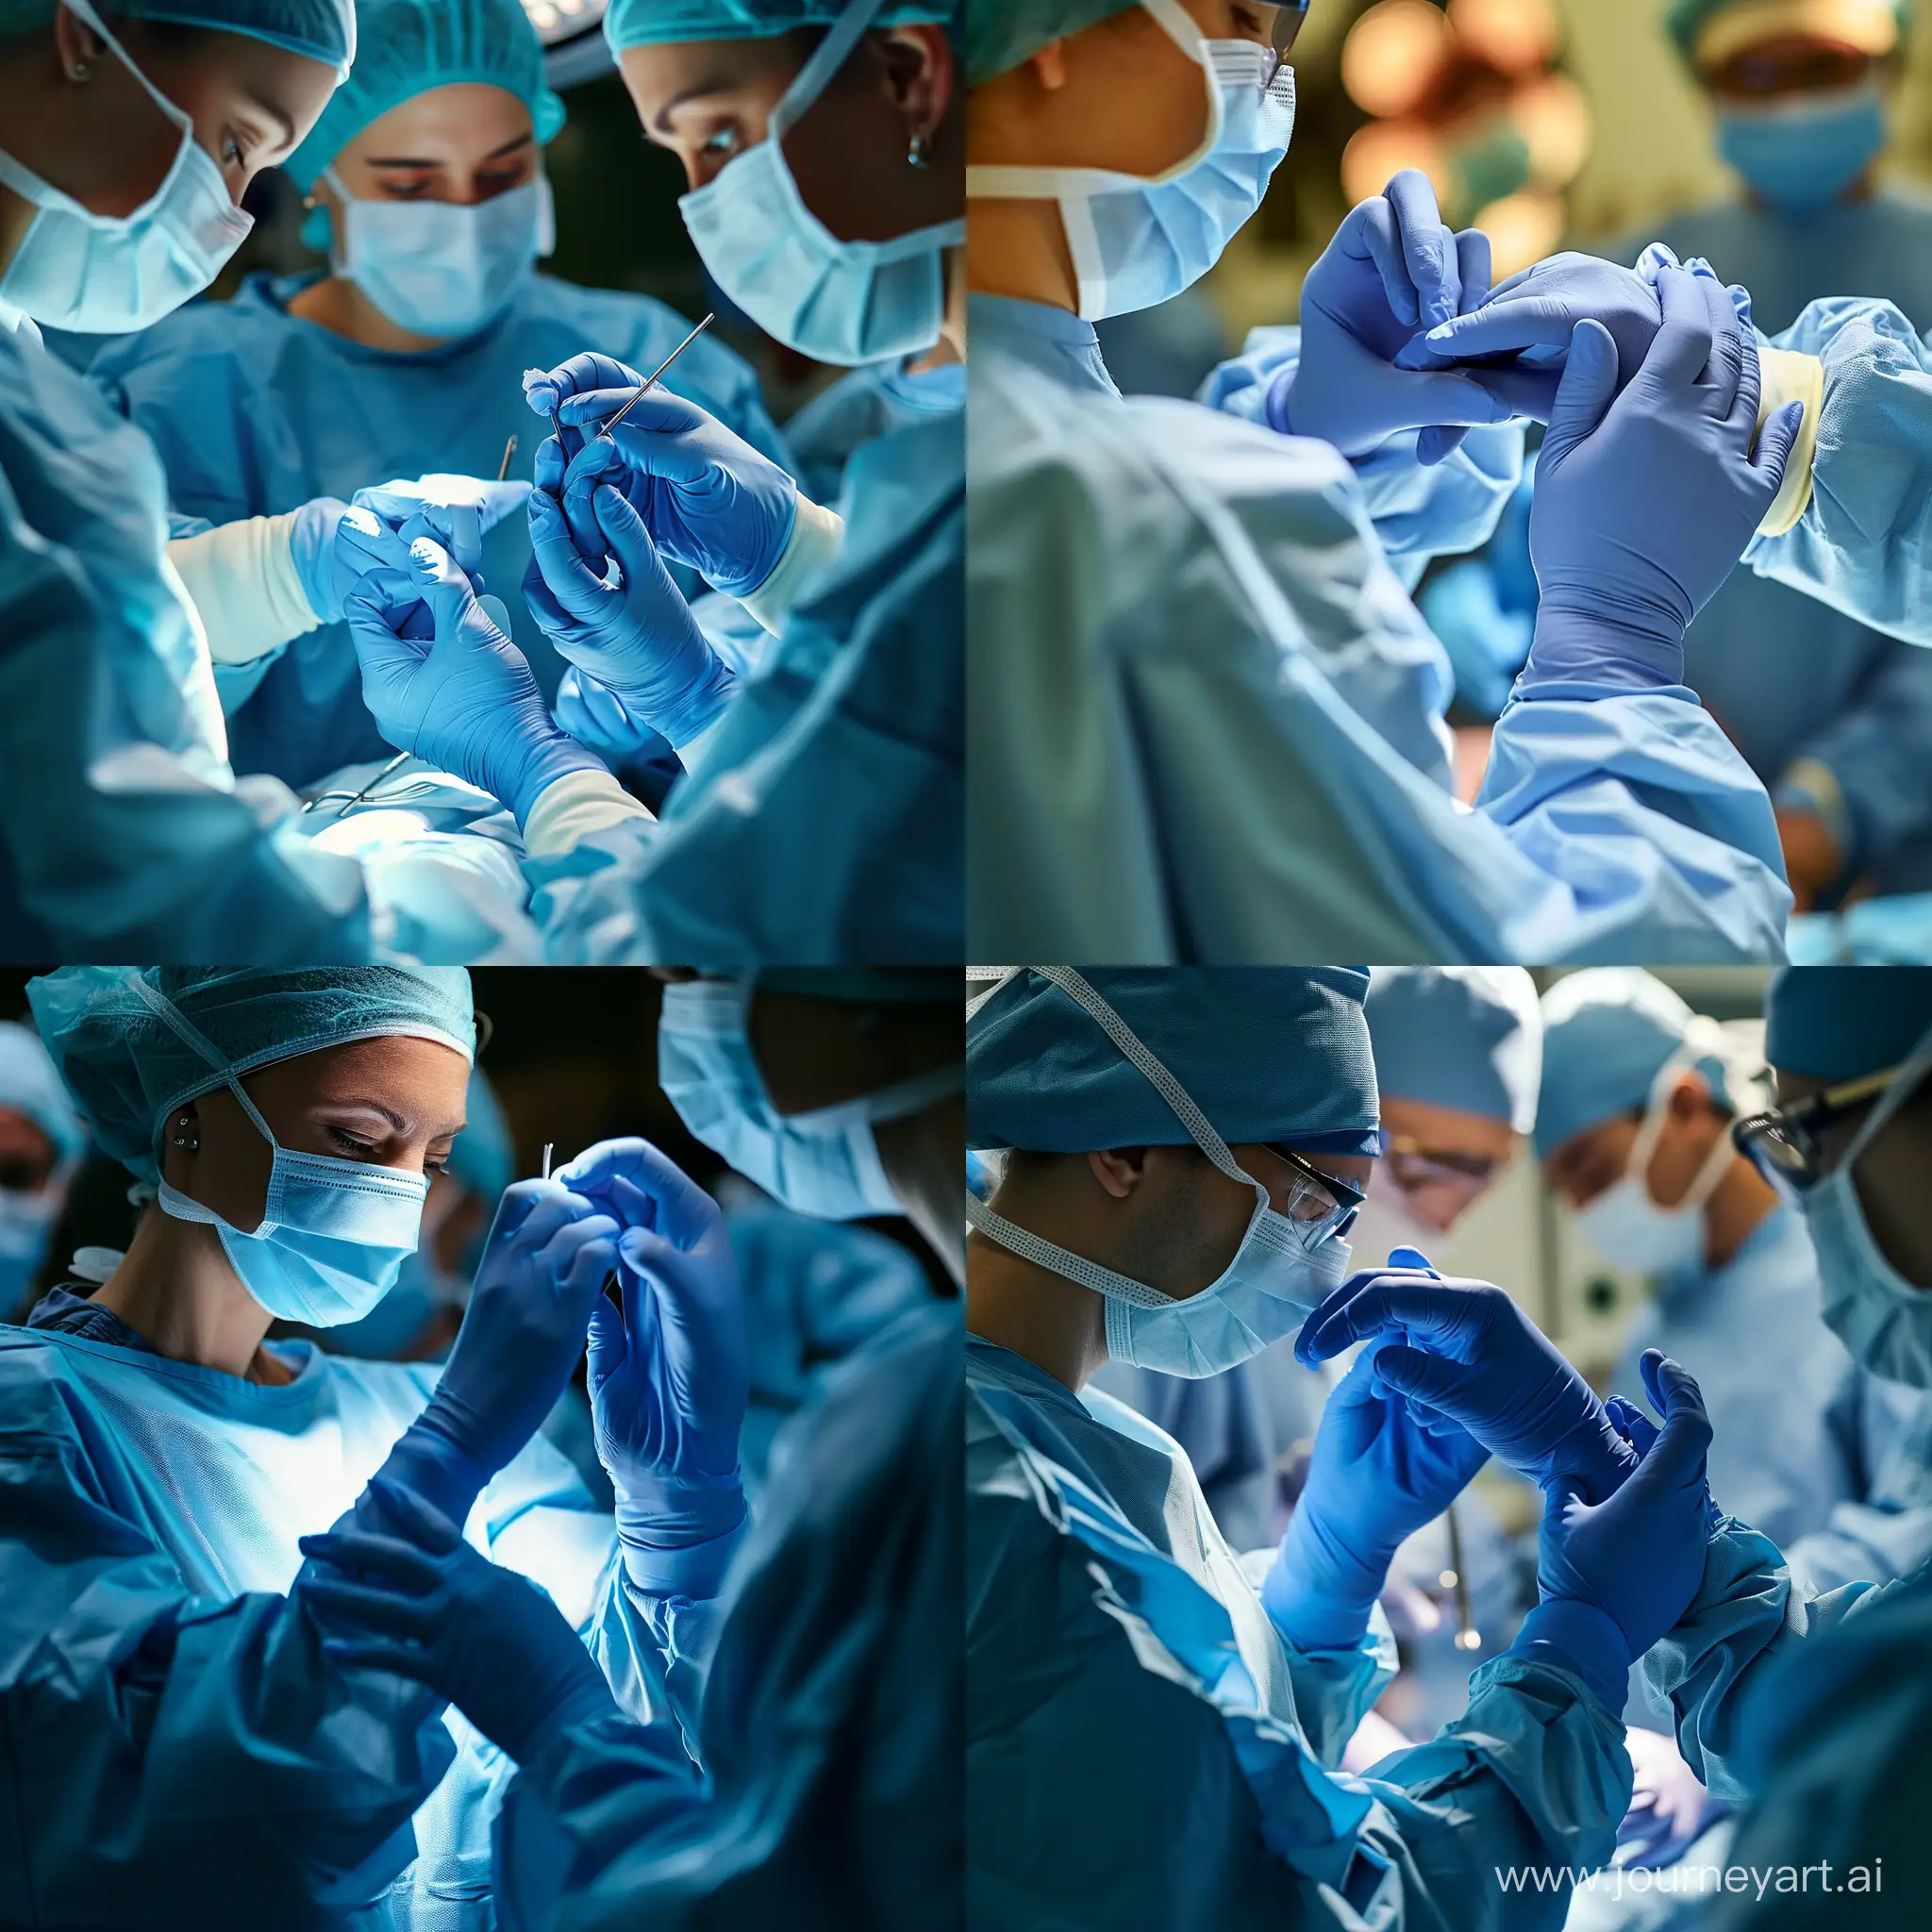 Surgeon-Prepares-for-Operation-with-Blue-Gloves-in-Operating-Room